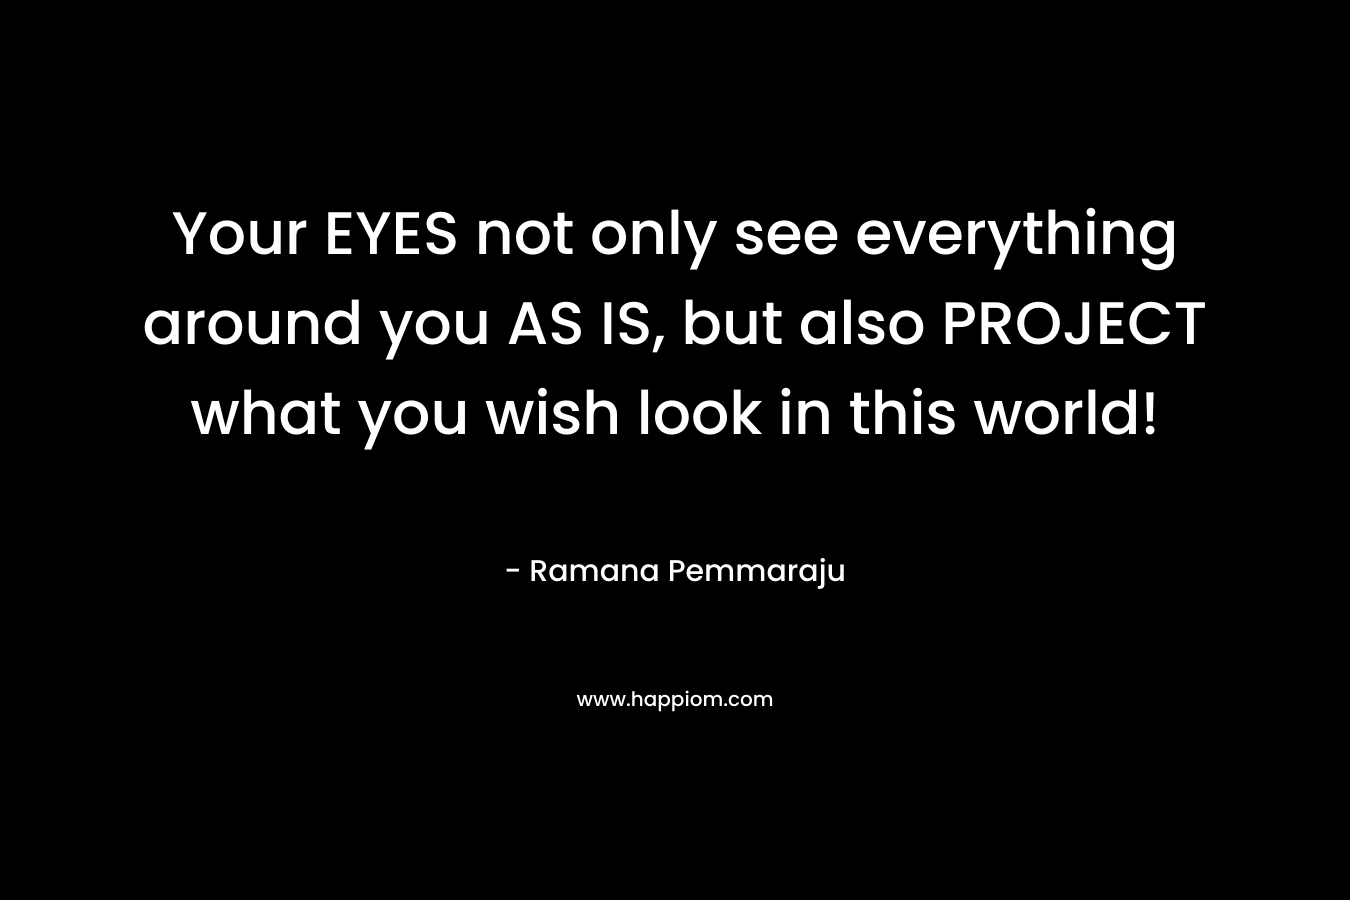 Your EYES not only see everything around you AS IS, but also PROJECT what you wish look in this world!